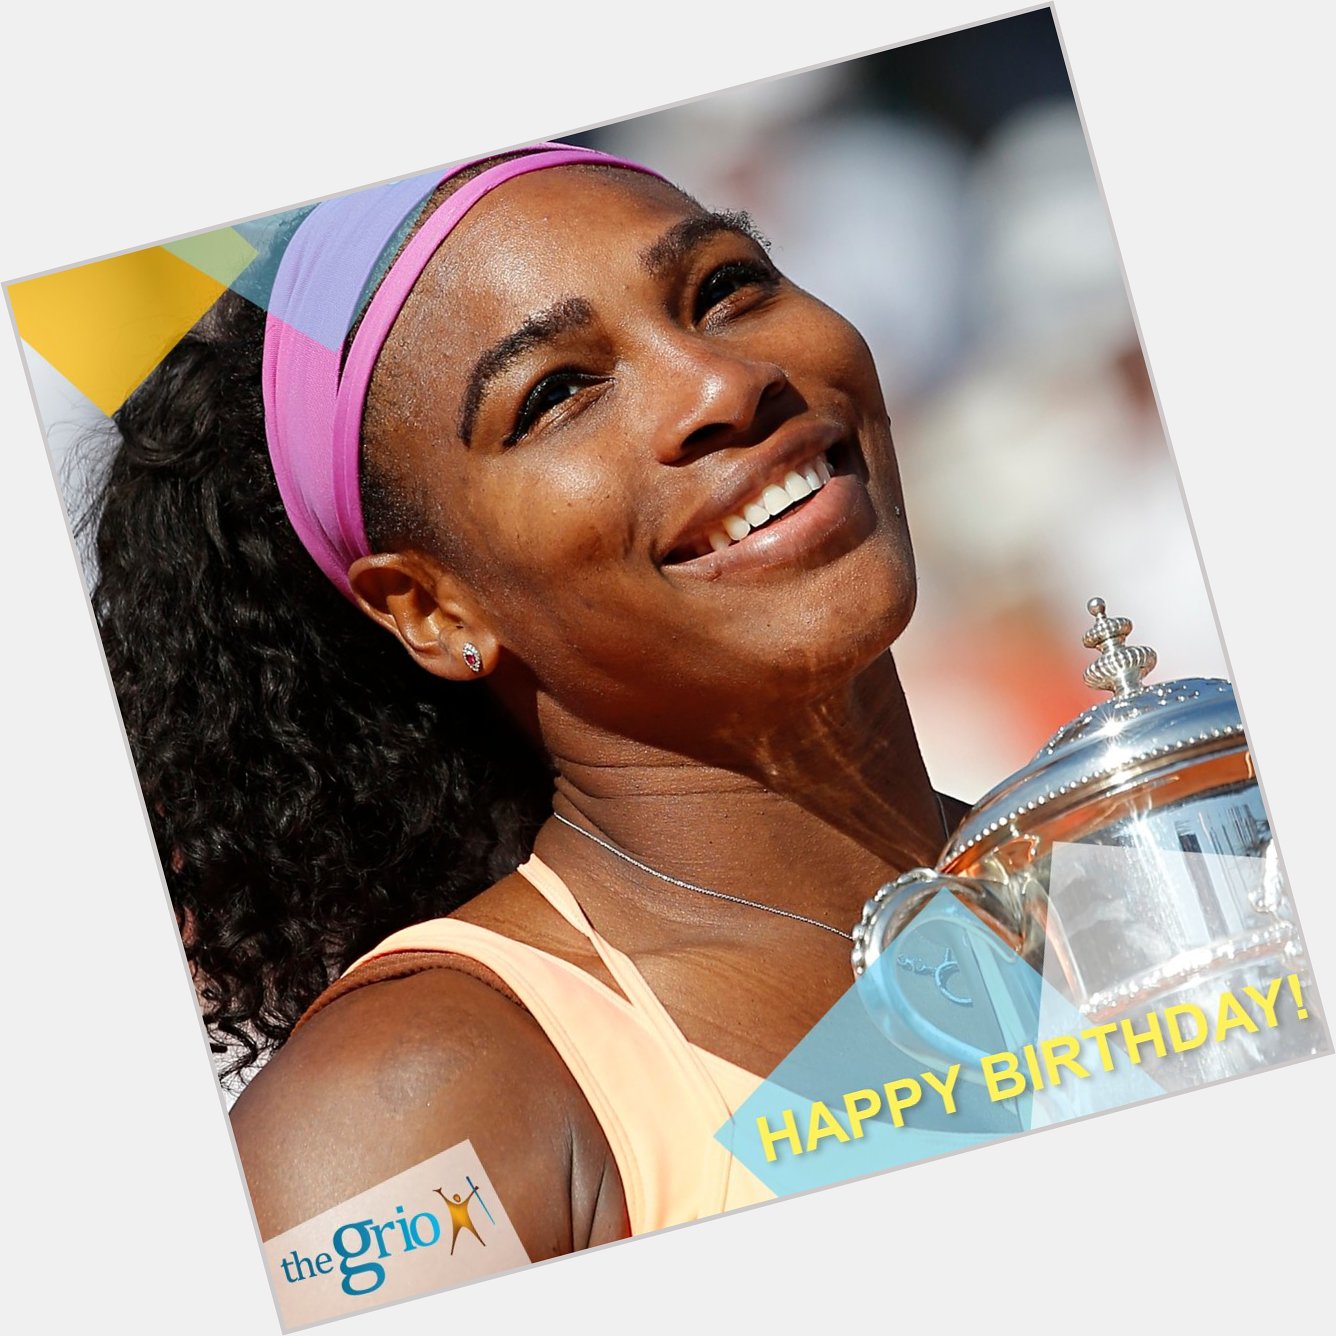 Shouting a Happy Birthday to the goddess, Serena Williams, on her special day!  